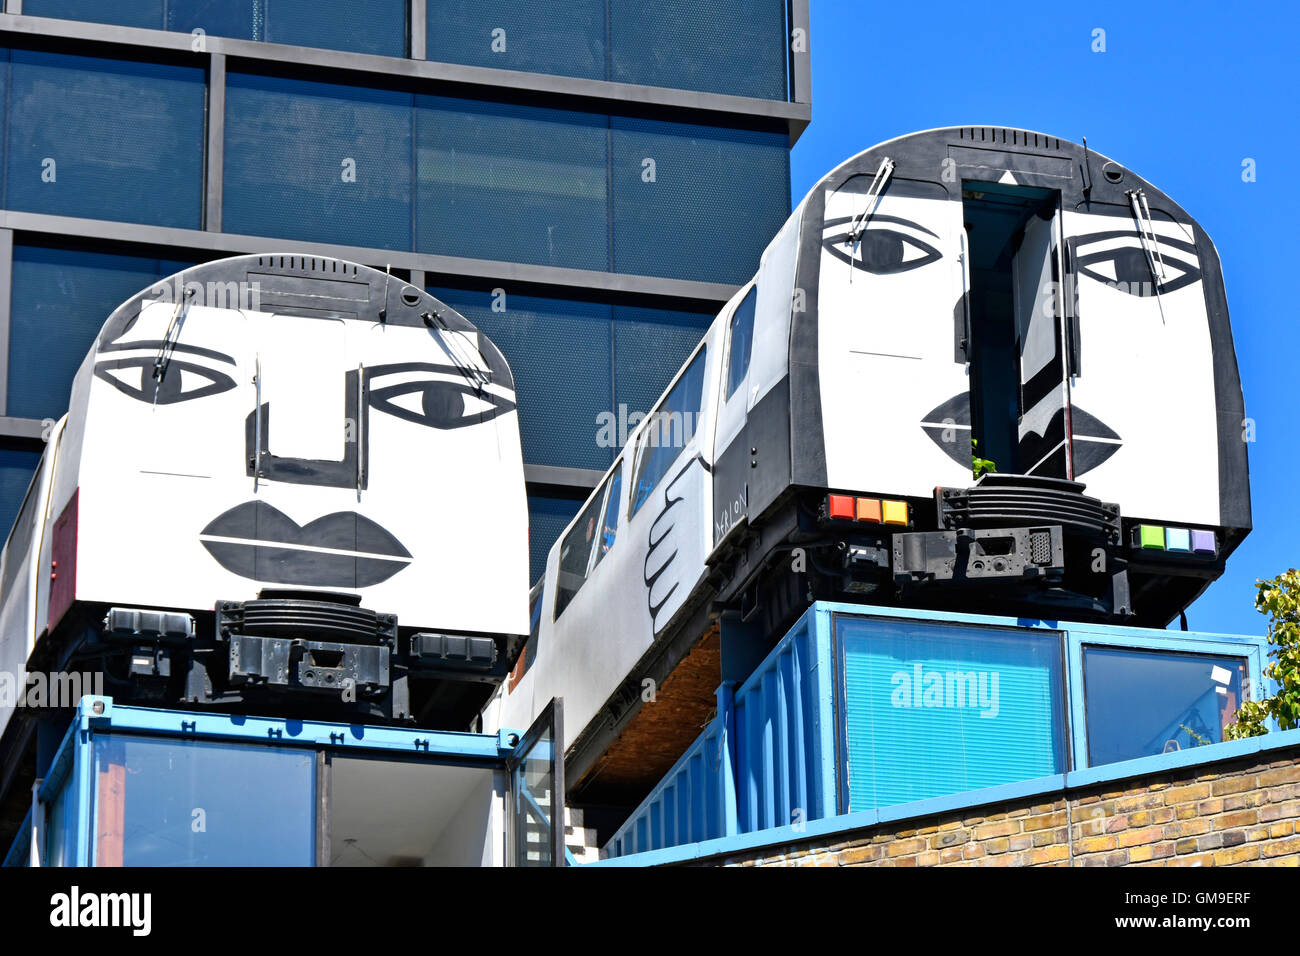 'Village Underground' recycled tube train carriages used as affordable artists studios perched on old shipping containers Shoreditch London England UK Stock Photo